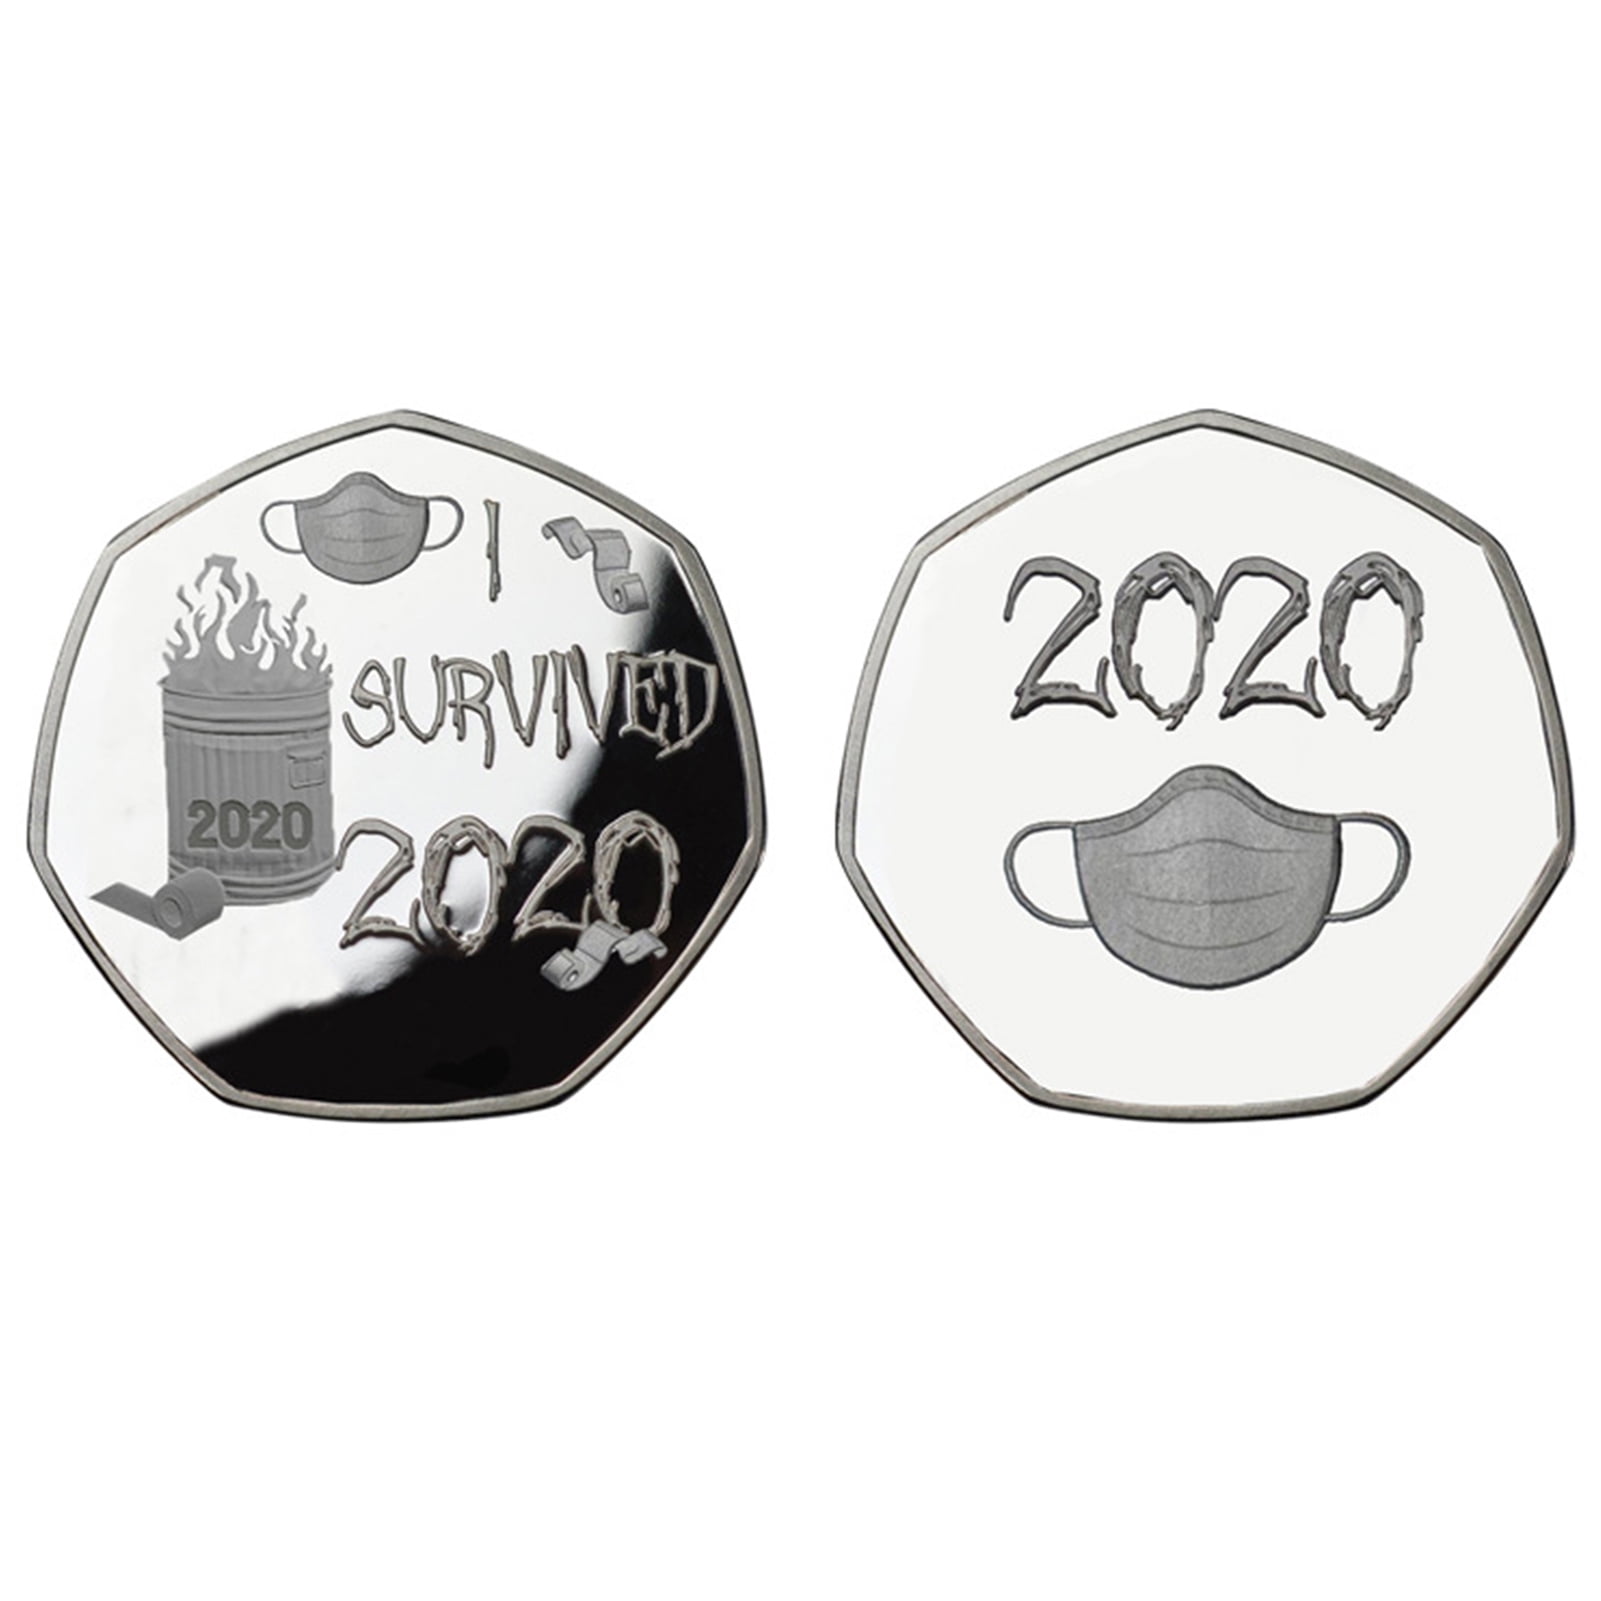 2020 Commemorative Coins,I Survived 2020 Coins Commemoratives Personalize Customize Birthday Gift for Friends Family Collectors 